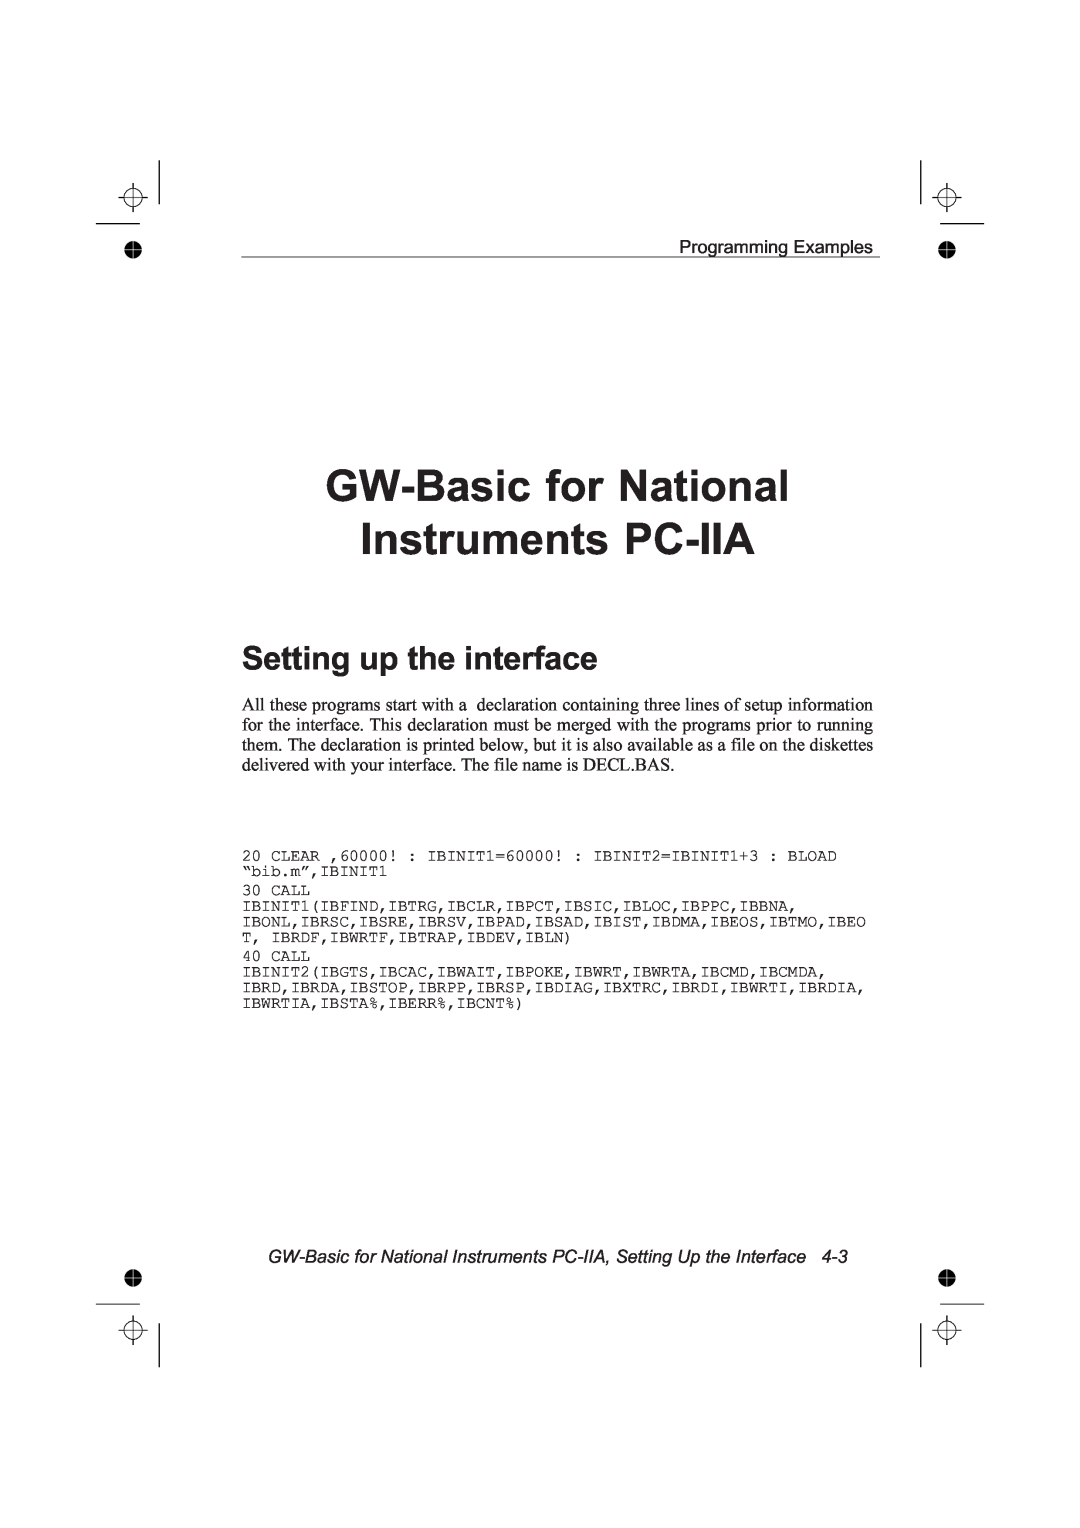 Fluke PM6681R, PM6685R manual GW-Basic for National Instruments PC-IIA, Setting up the interface 